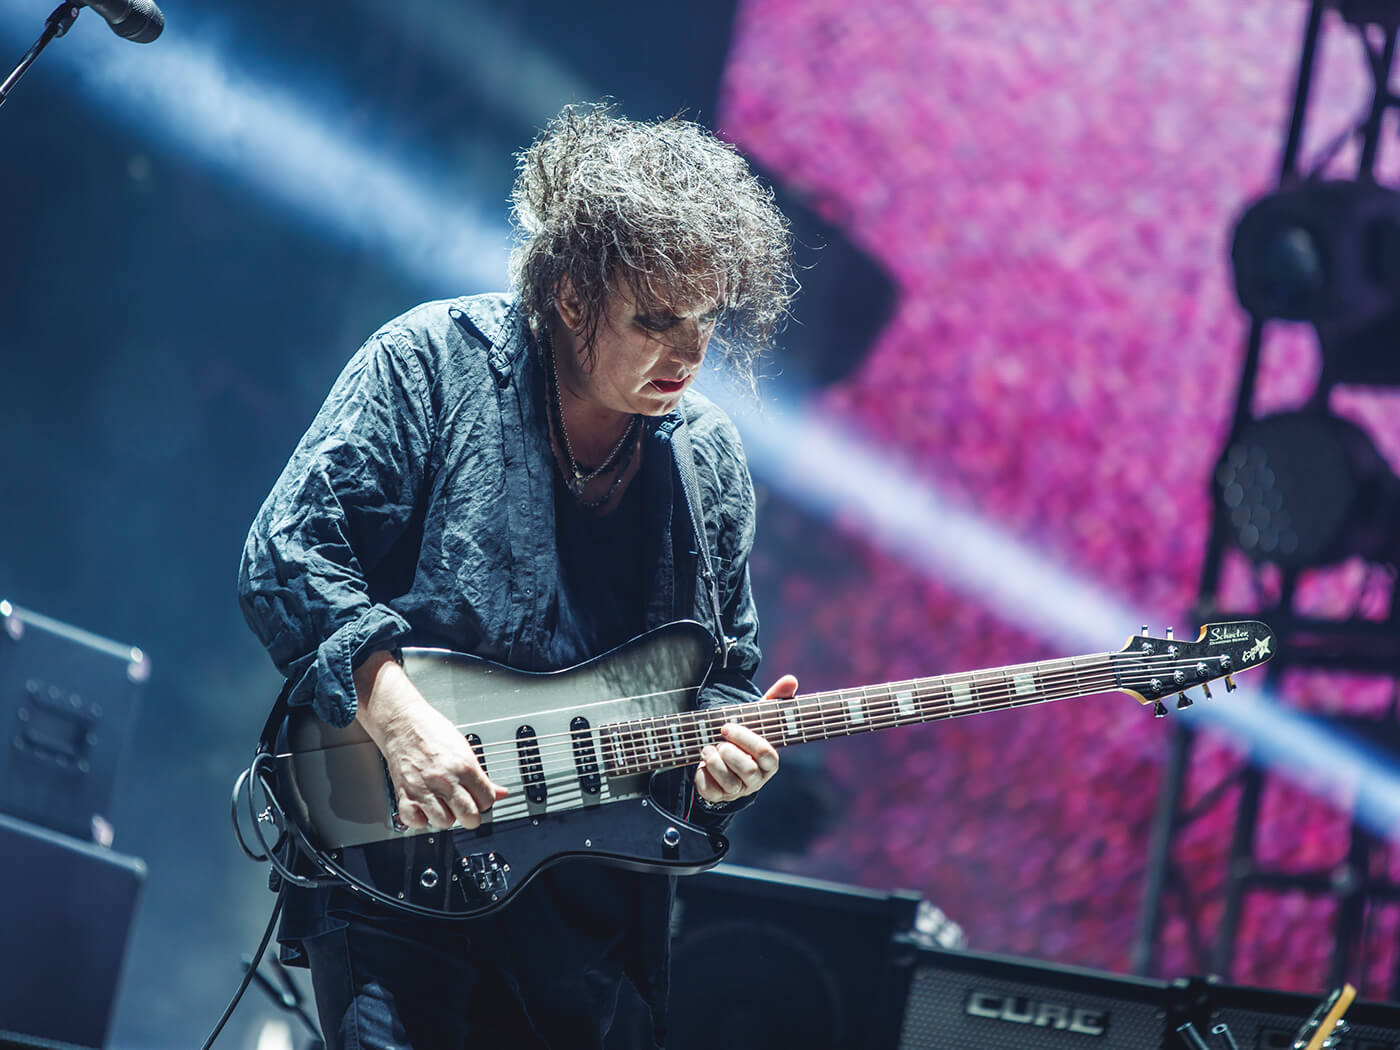 Robert Smith of The Cure playing his signature Schecter Ultracure by Javier Bragado/WireImage via Getty Images